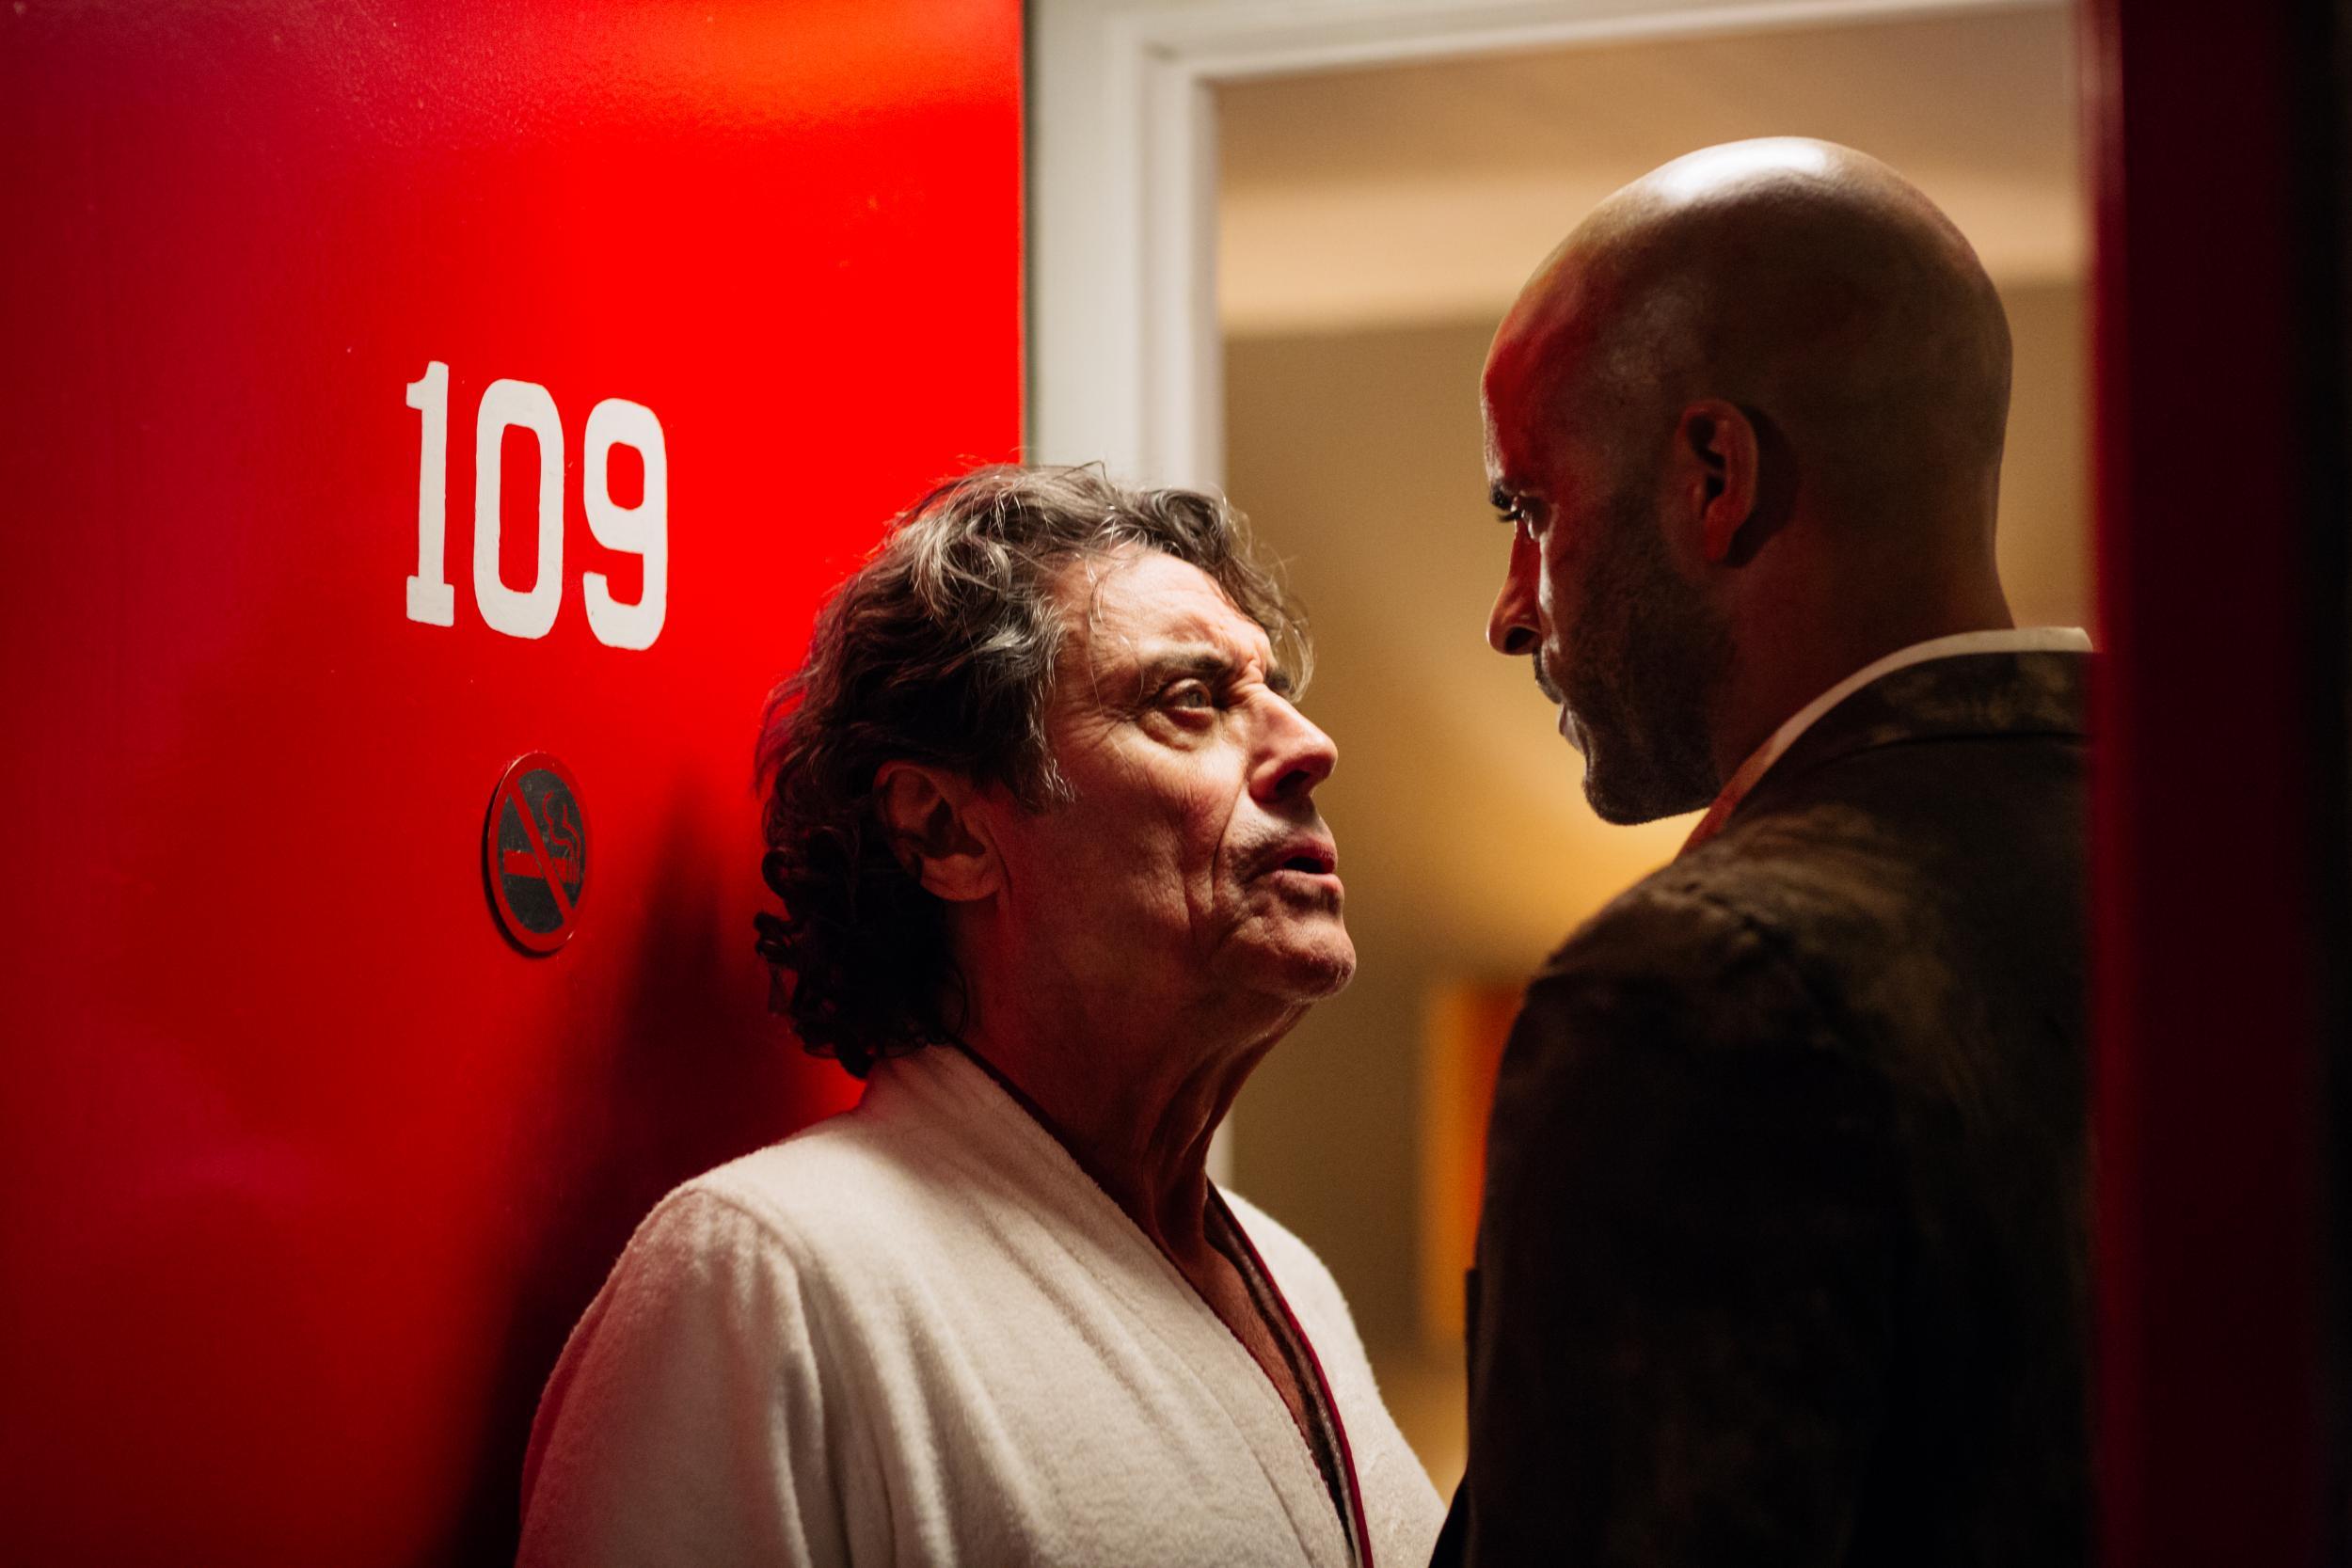 Ian McShane as Mr. Wendesday (left) and Ricky Whittle as Shadow Moon (right) Starz/American Gods